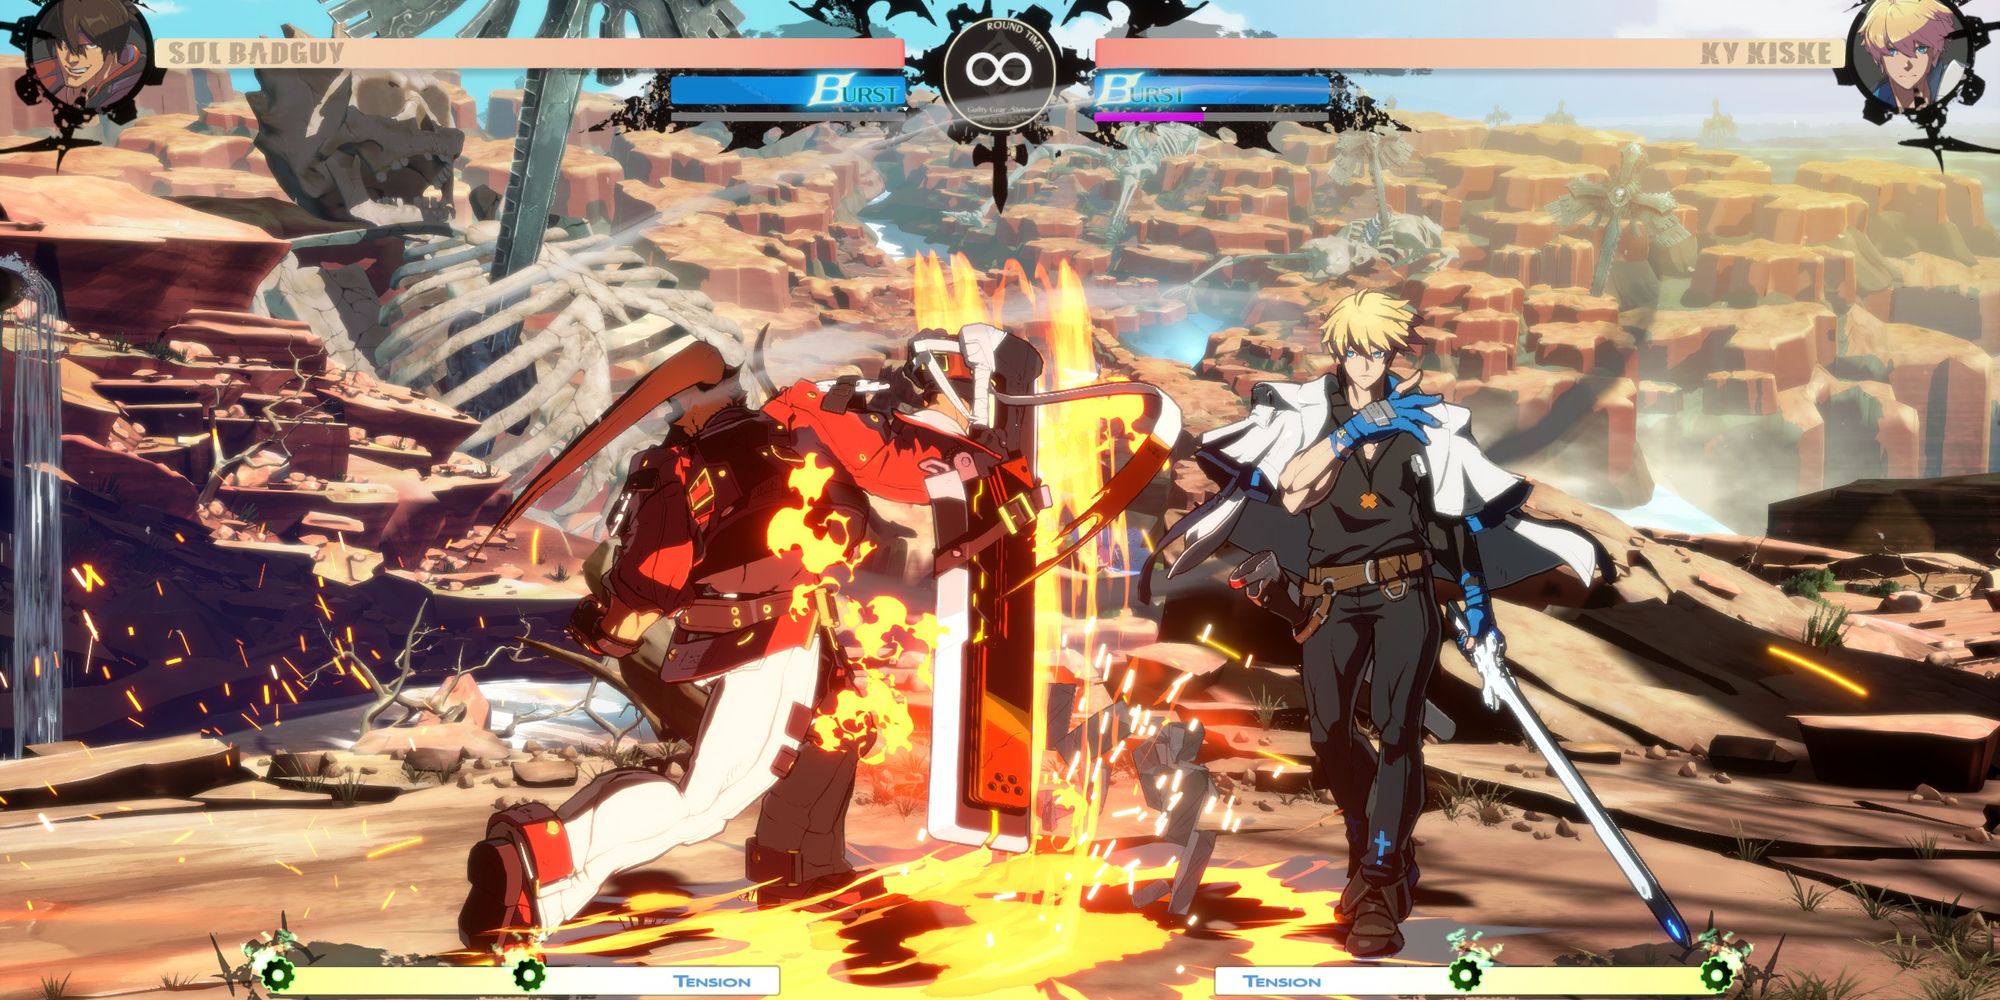 Guilty Gear Strive How To Stop Sol Badguy Kind Of